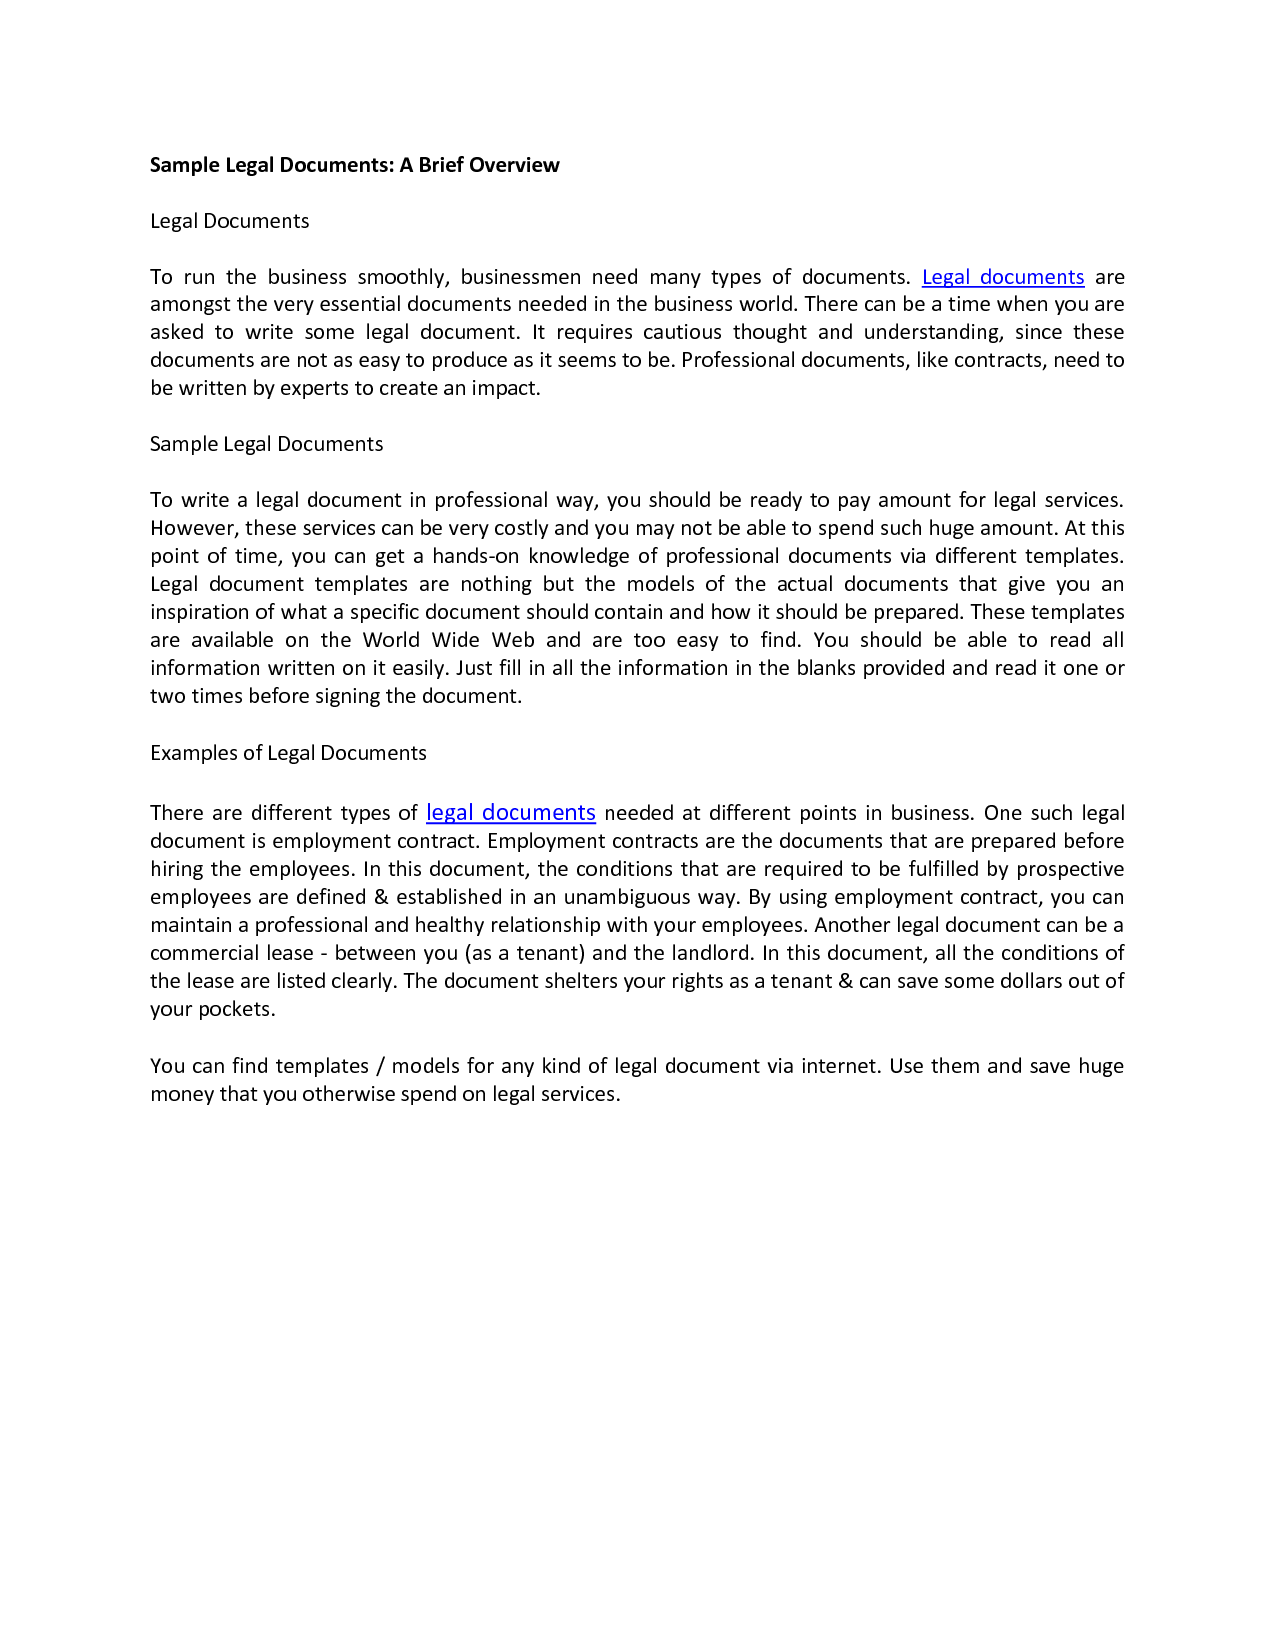 sample-legal-document-free-printable-documents